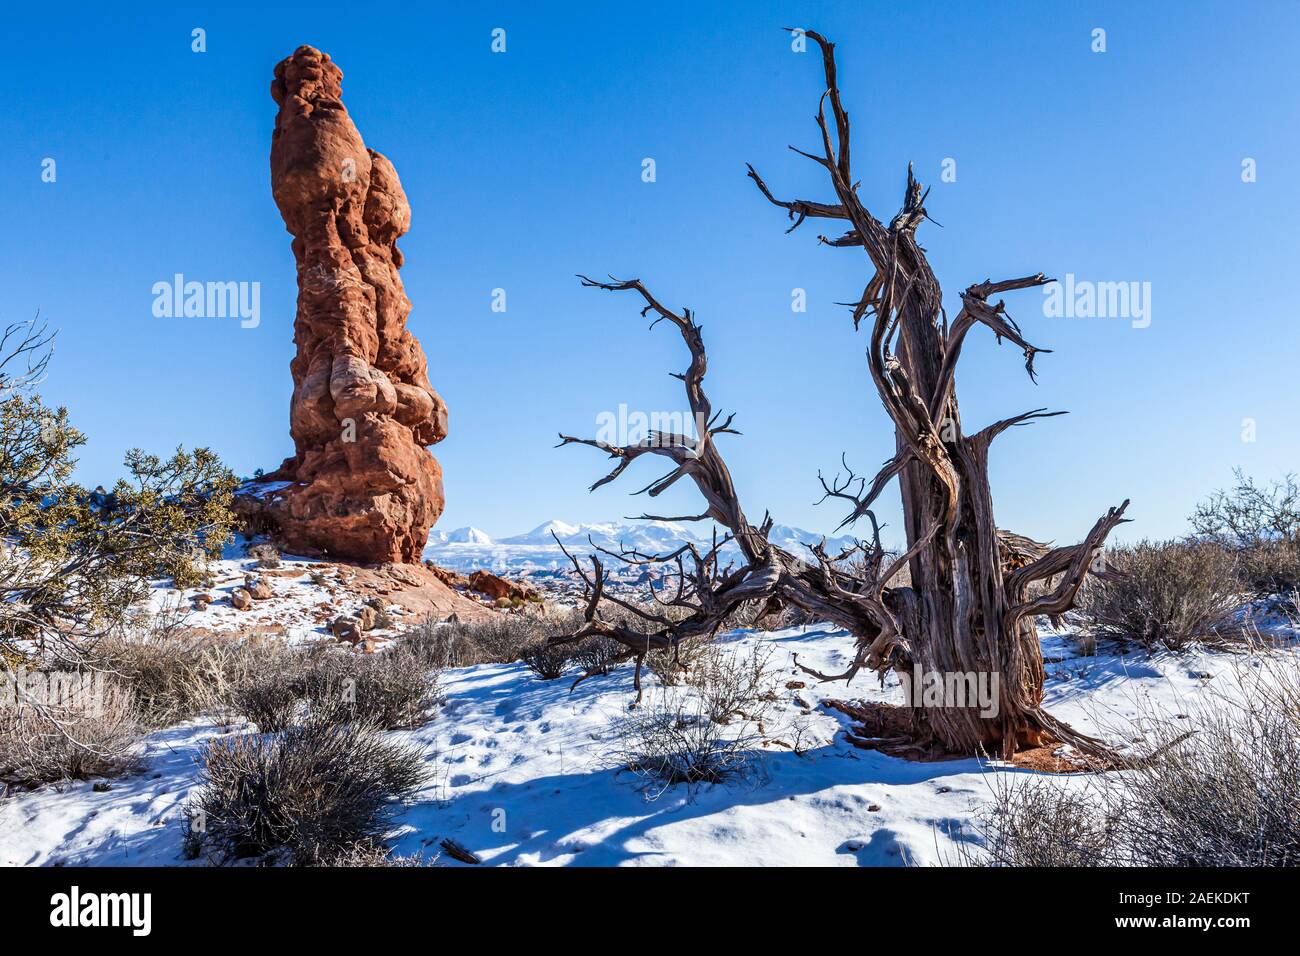 An old dead tree and a sandstone pinnacle, Arches National Park, Utah, USA. Stock Photo